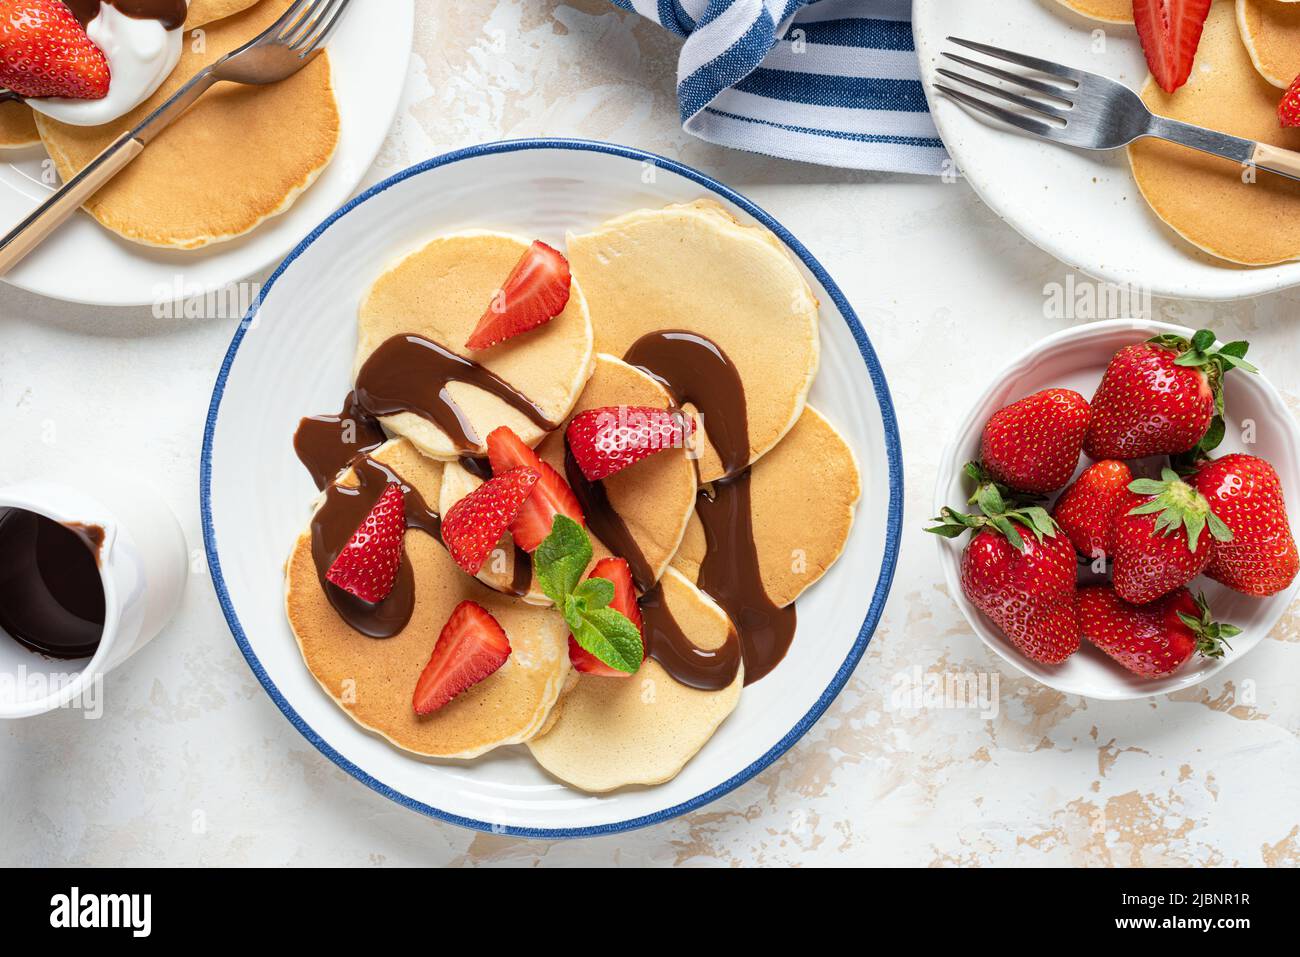 Pancakes with strawberry and chocolate on a plate, top view. Sweet breakfast food Stock Photo